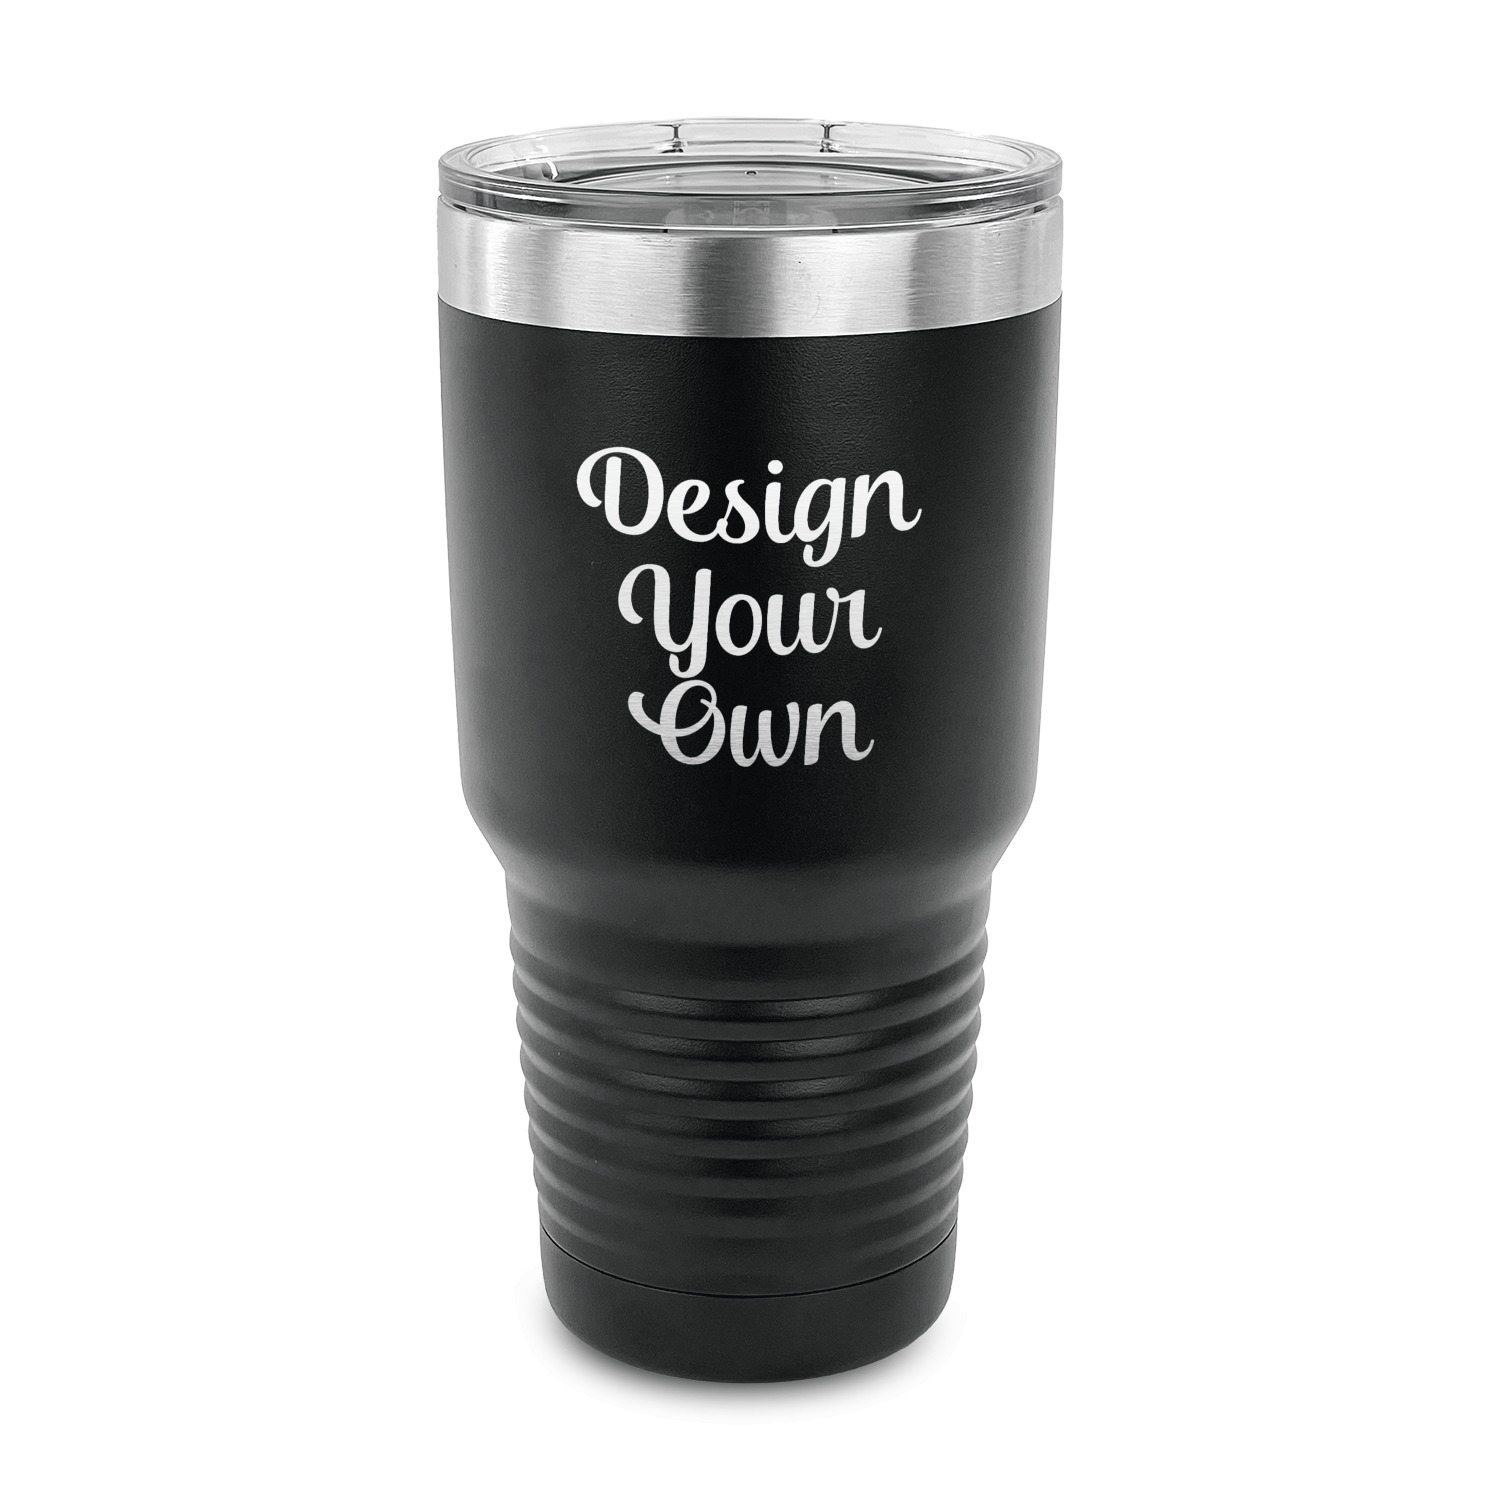 https://www.youcustomizeit.com/common/MAKE/965833/Design-Your-Own-30-oz-Stainless-Steel-Ringneck-Tumblers-Black-FRONT.jpg?lm=1633711865